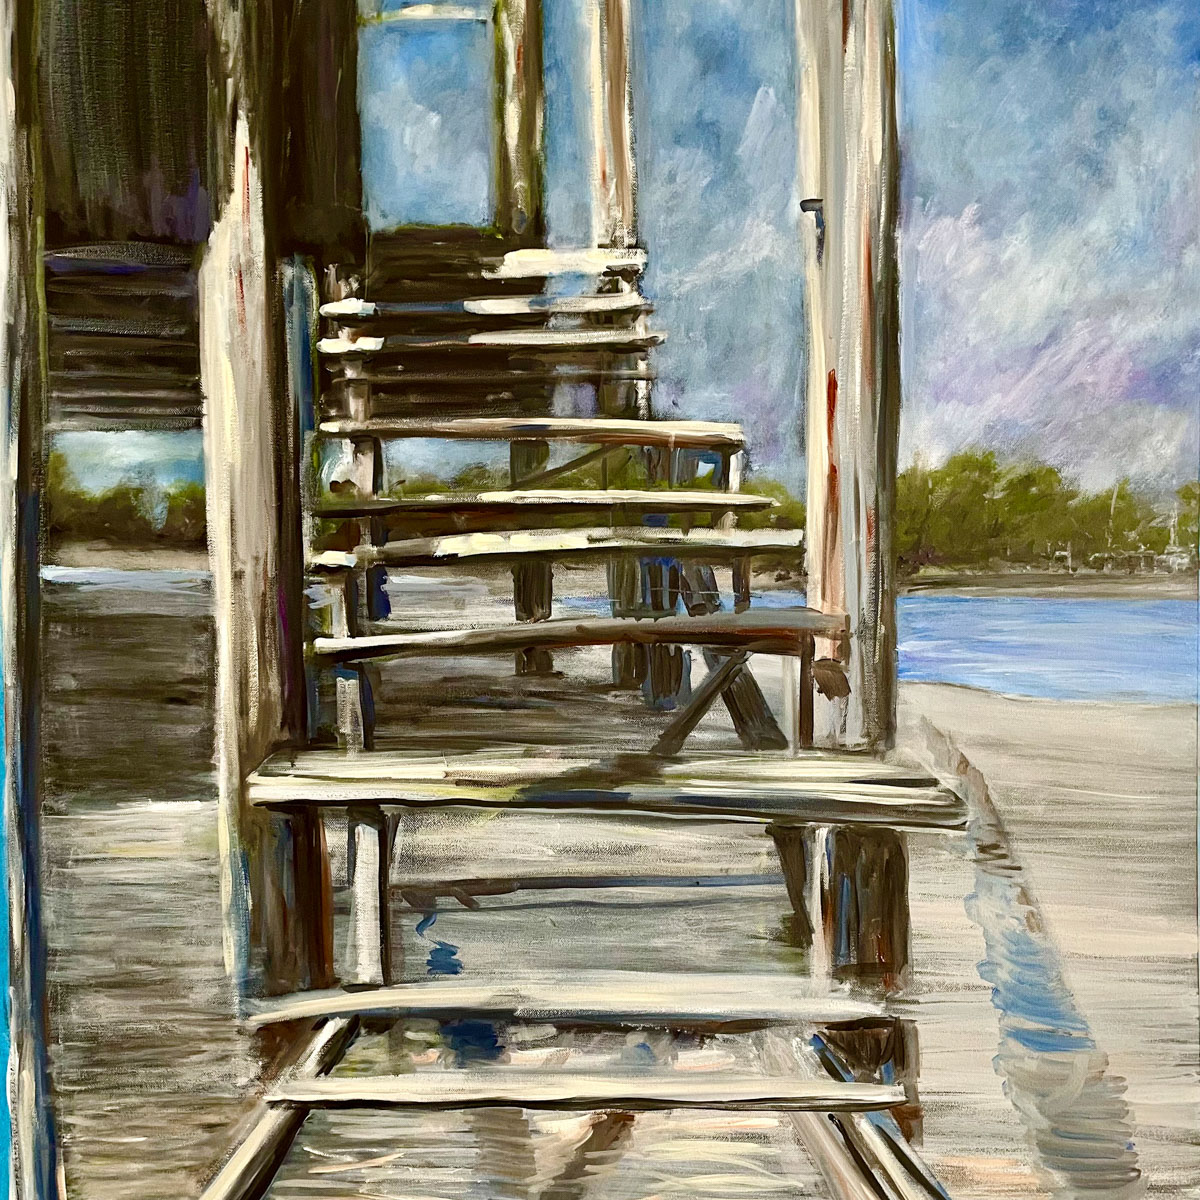 A painting of timber stairs to a jetty in a tidal area - Ray Gleeson Art